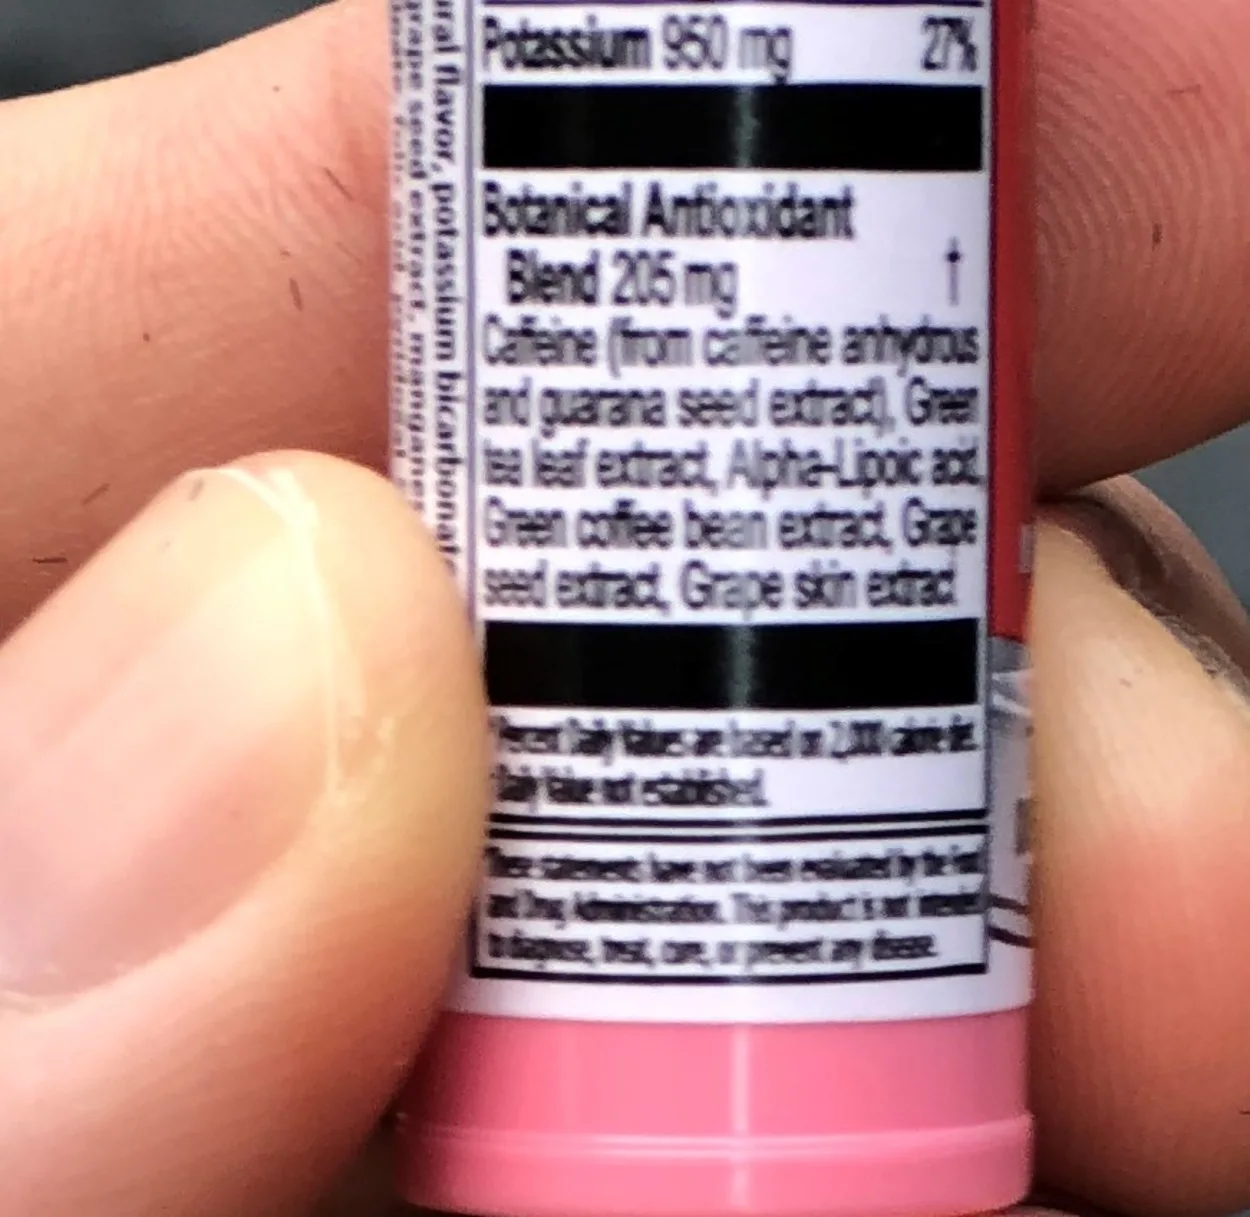 A tube of Zipfizz energy drink showing the amount of antioxidants present in it.